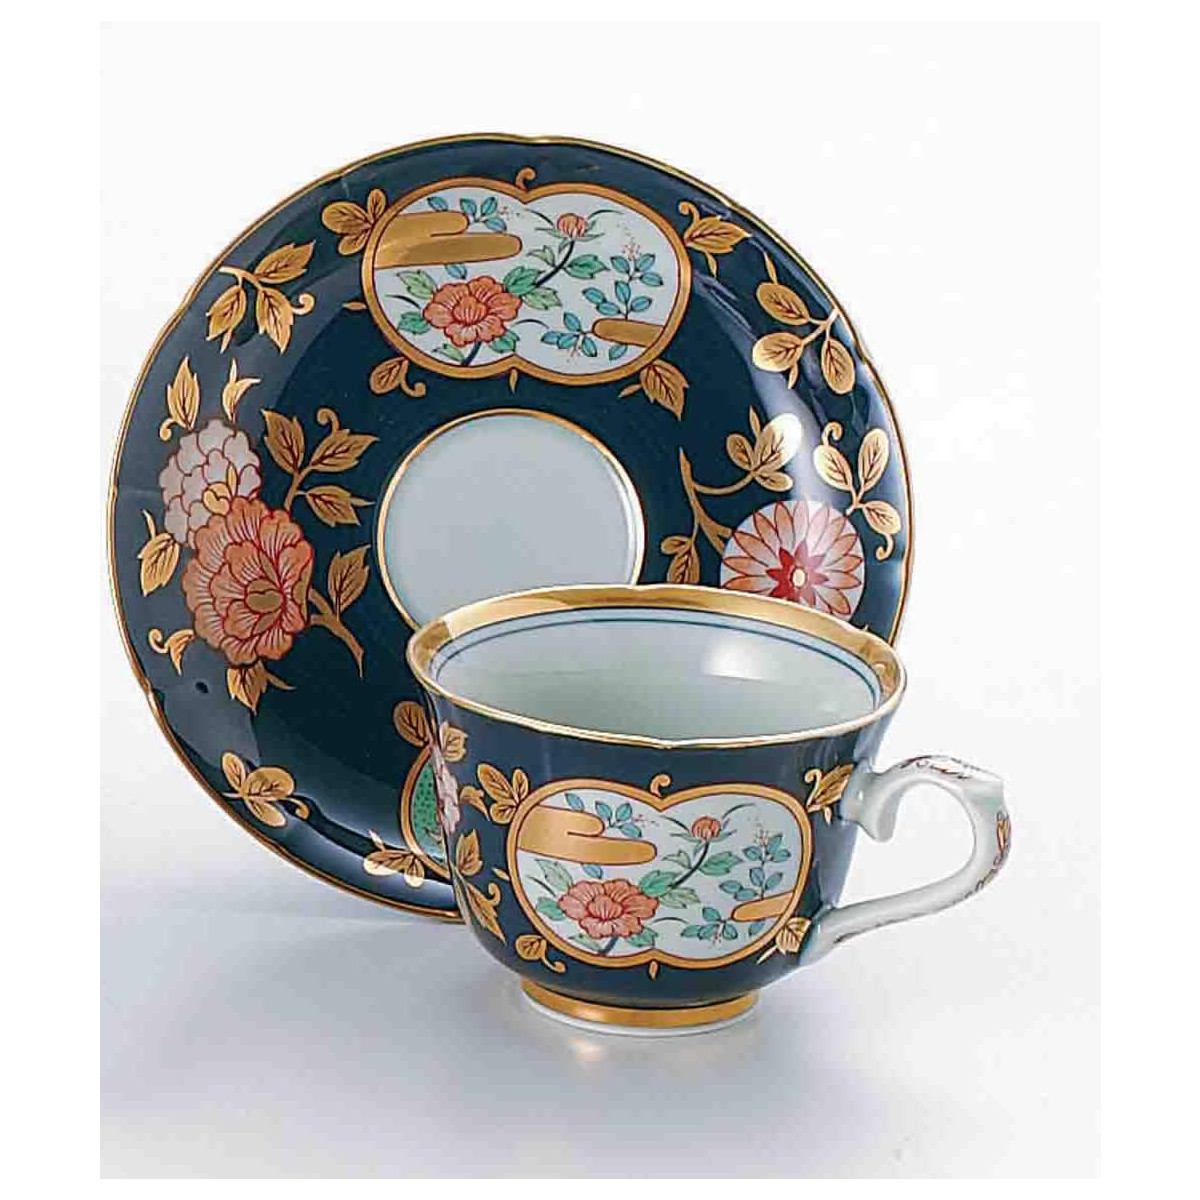 Tokyo Matcha Selection Standard ship by EMS: with Tracking /& Insurance Heritage Imari : Old Imari Design Golden Floral - 5 Coffee Cups /& Saucers Set - Japanese Porcelain w Box from Japan